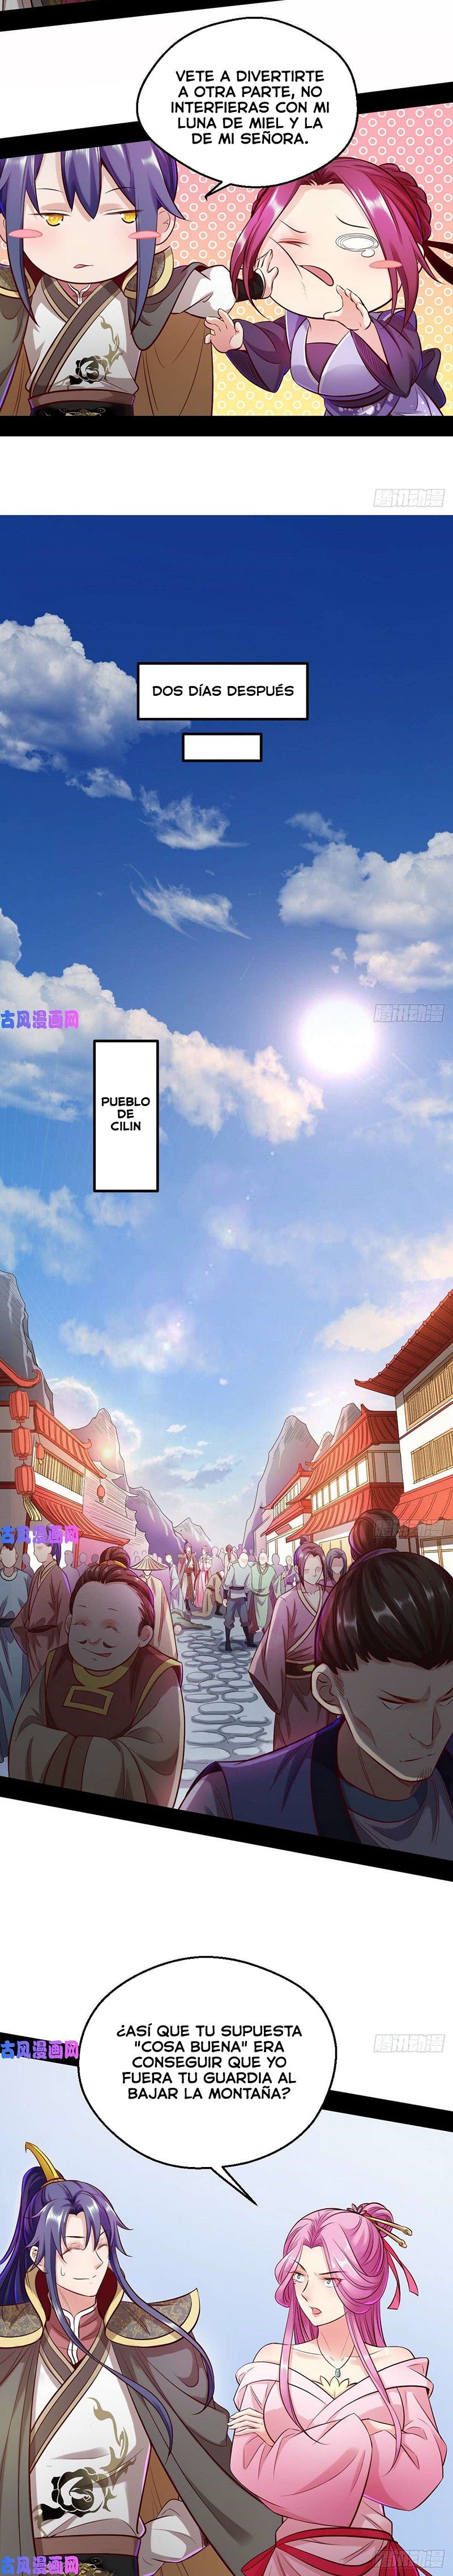 Manga Soy un dios maligno Chapter 41 image number 19